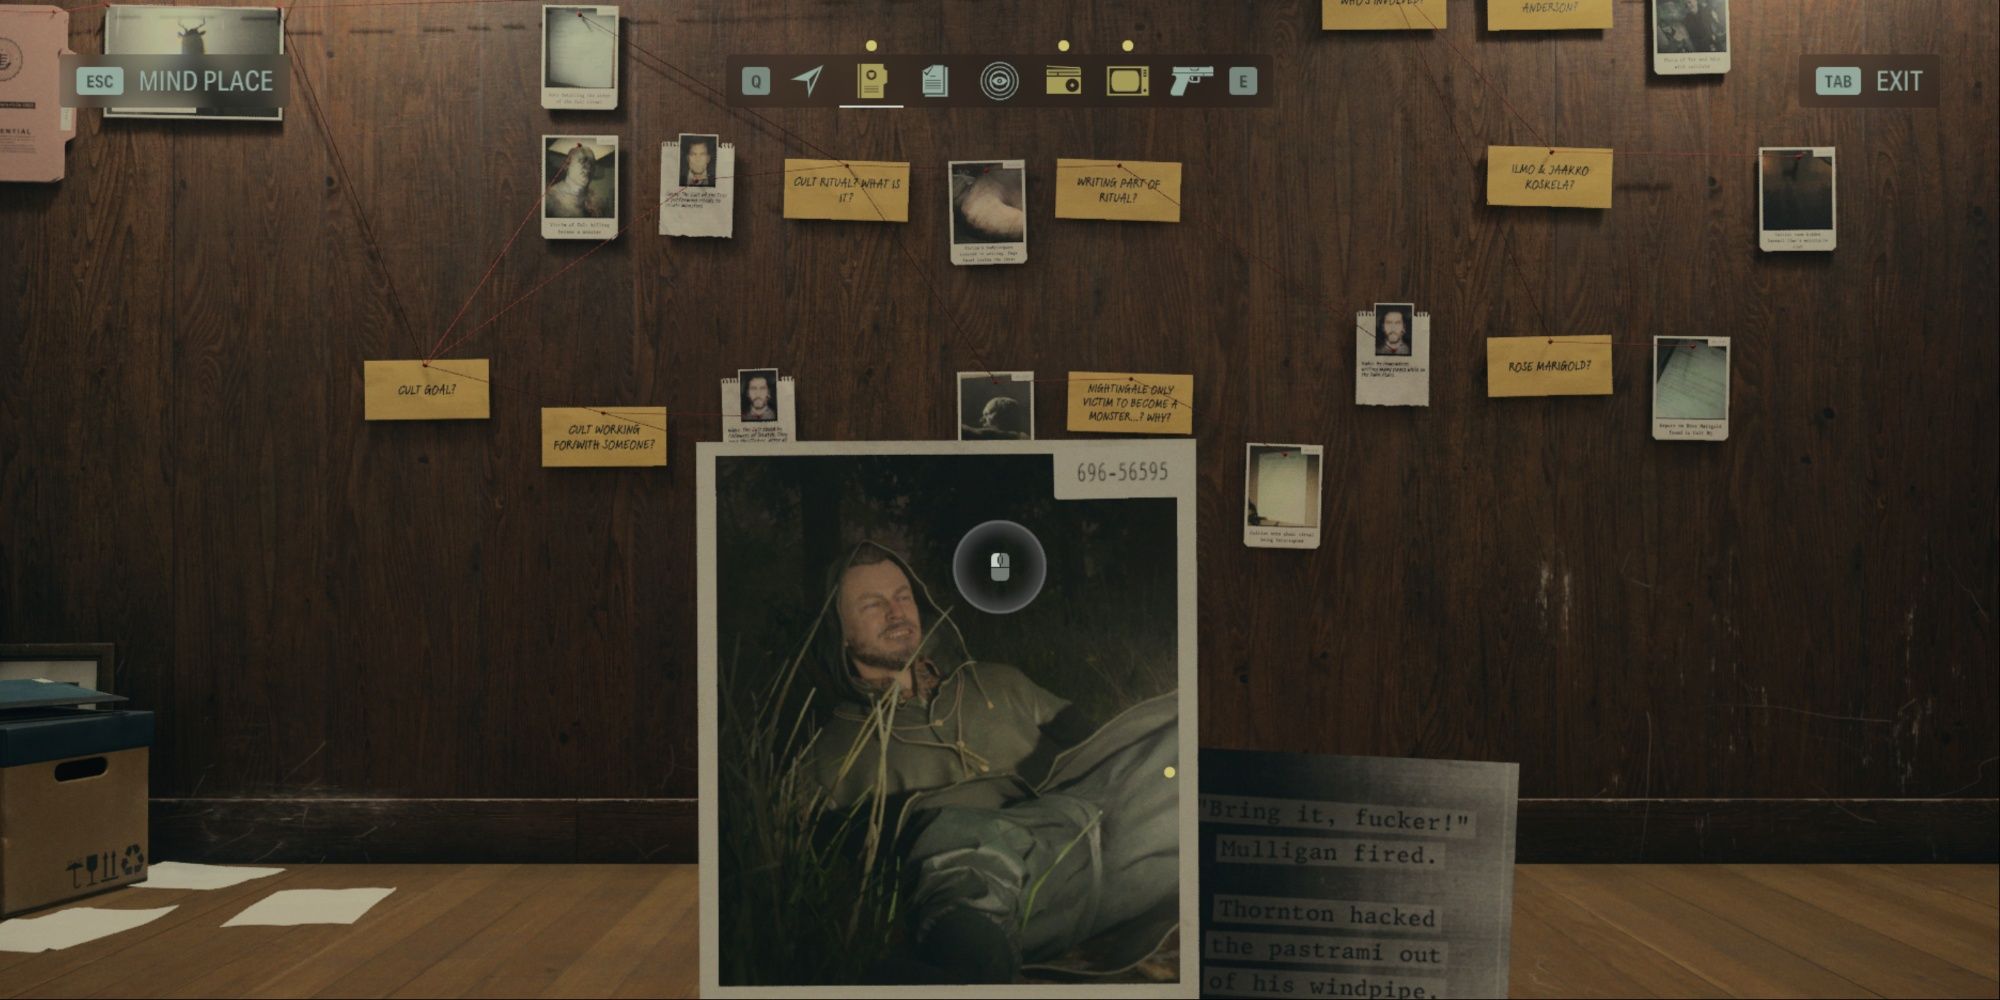 A series of pictures and post-it notes on a case board detailing goals and members of the Cult of the Tree, Ilmo Koskela unmasked at the very center.